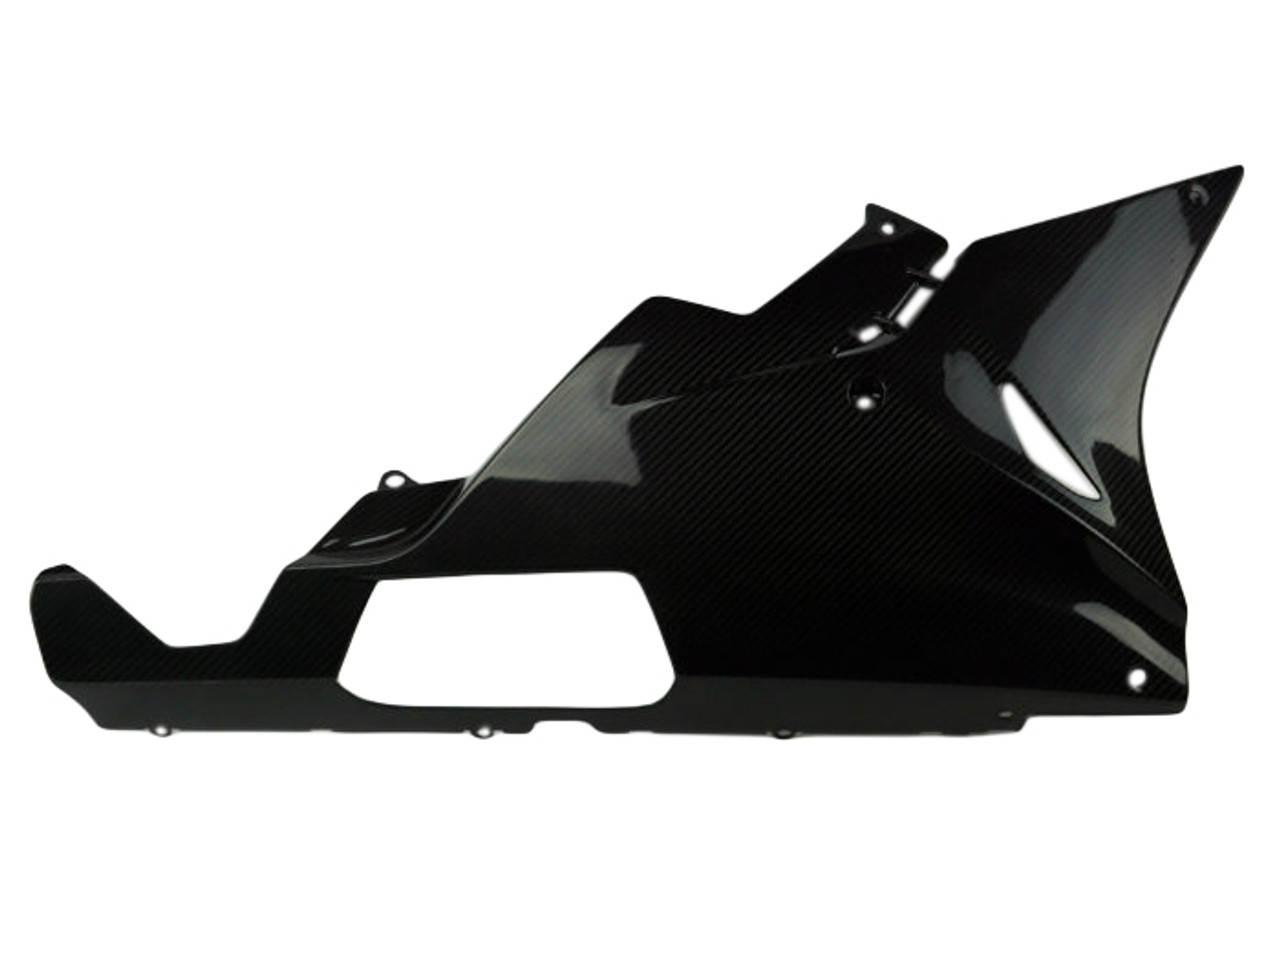 Belly Pan in Glossy Twill Weave Carbon Fiber for BMW S1000RR 15-16